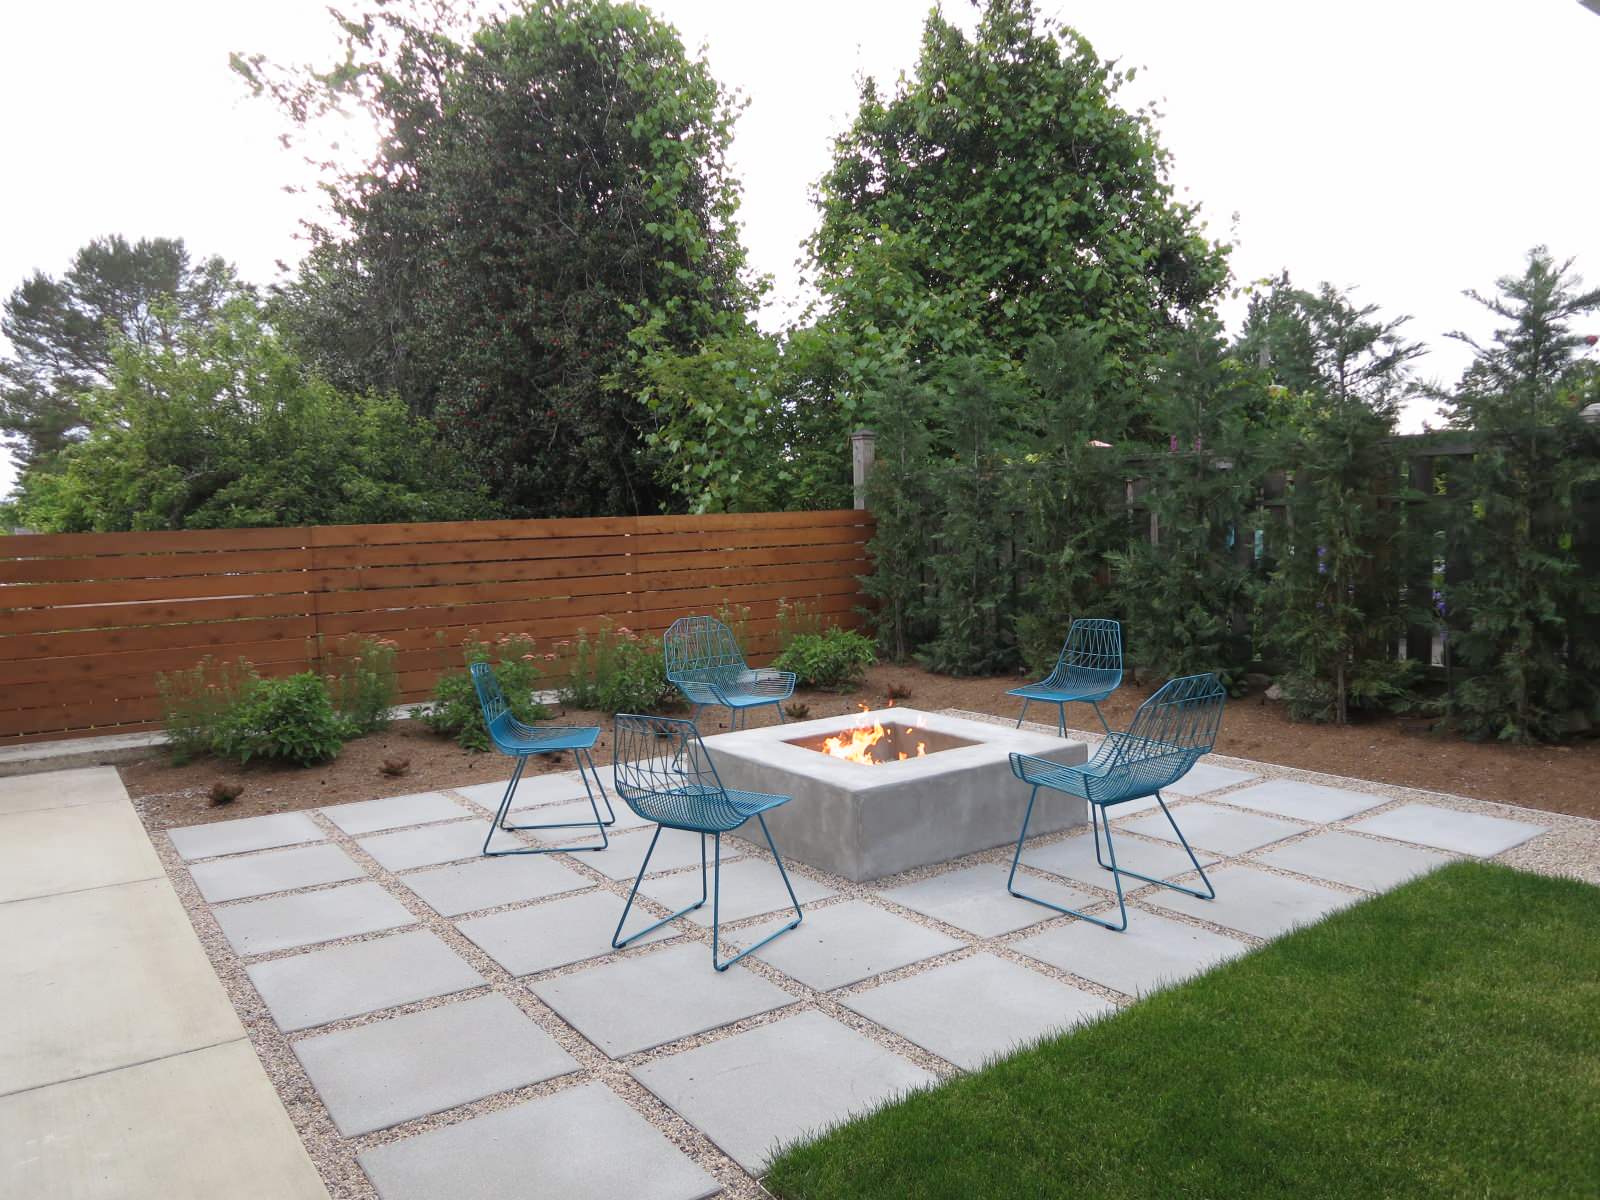 75 Backyard With A Fire Pit Ideas You'Ll Love - May, 2023 | Houzz